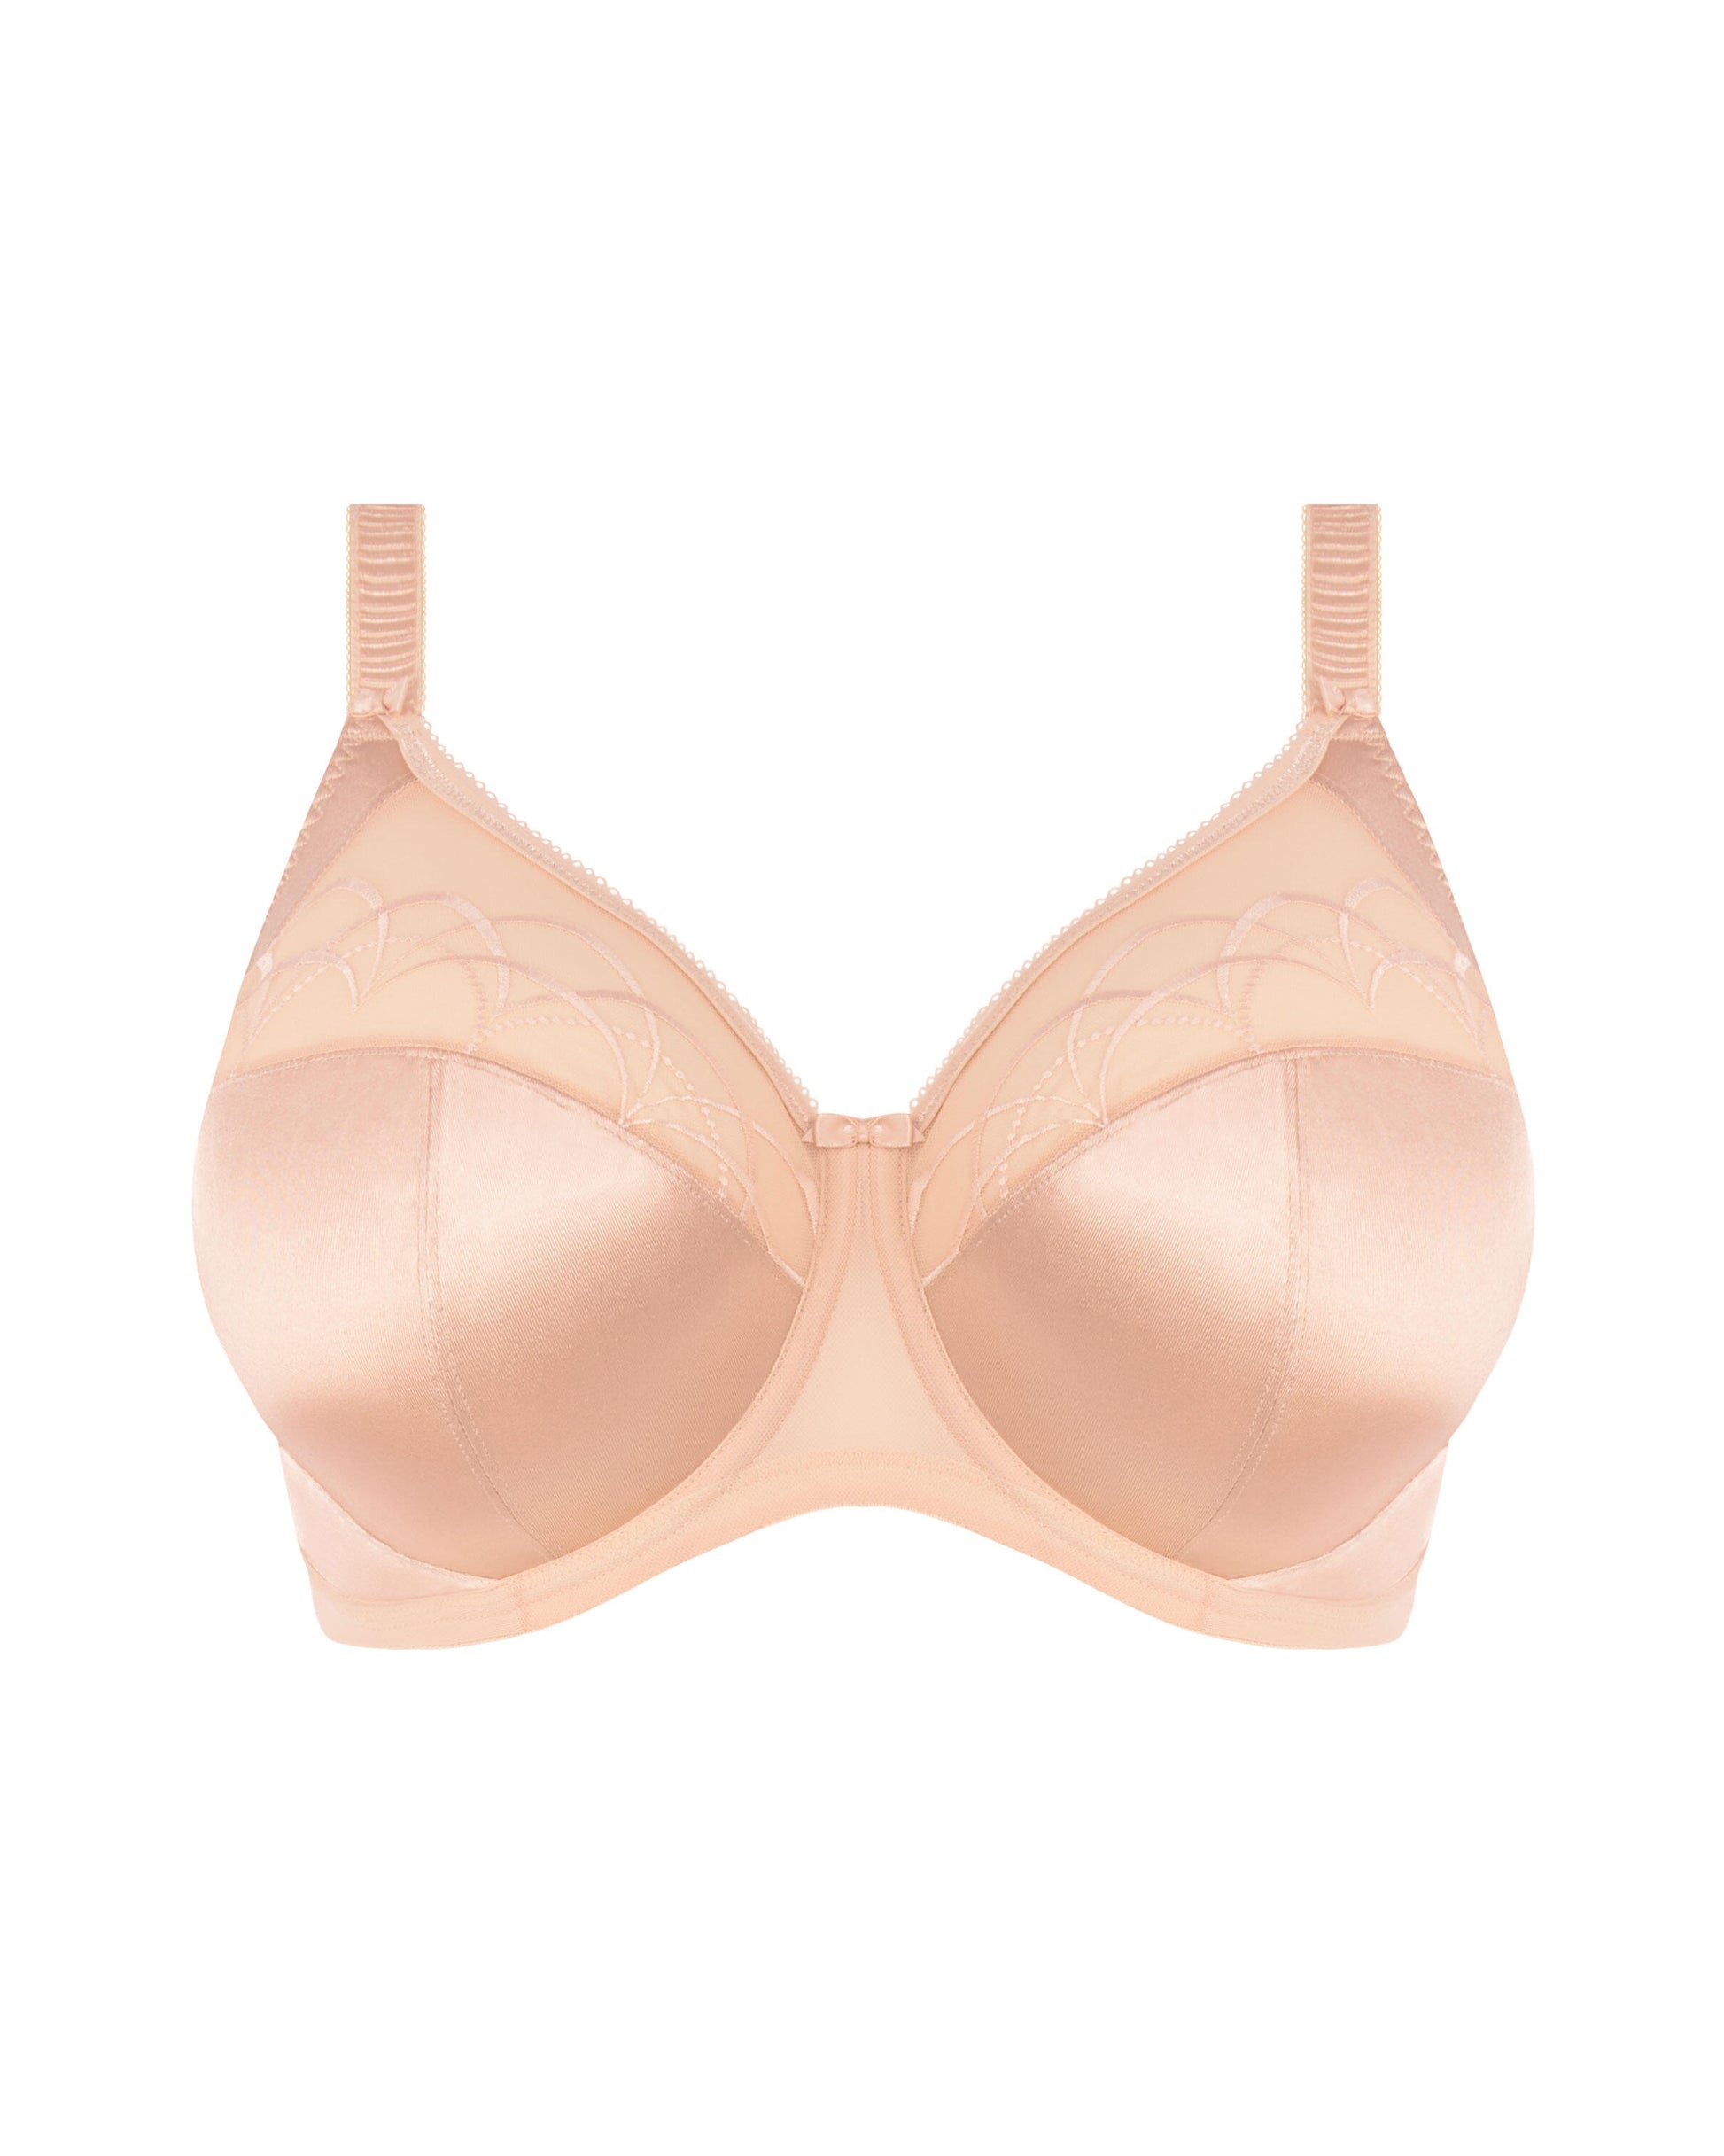 Flat lay of a soft cup underwire bra in nude beige